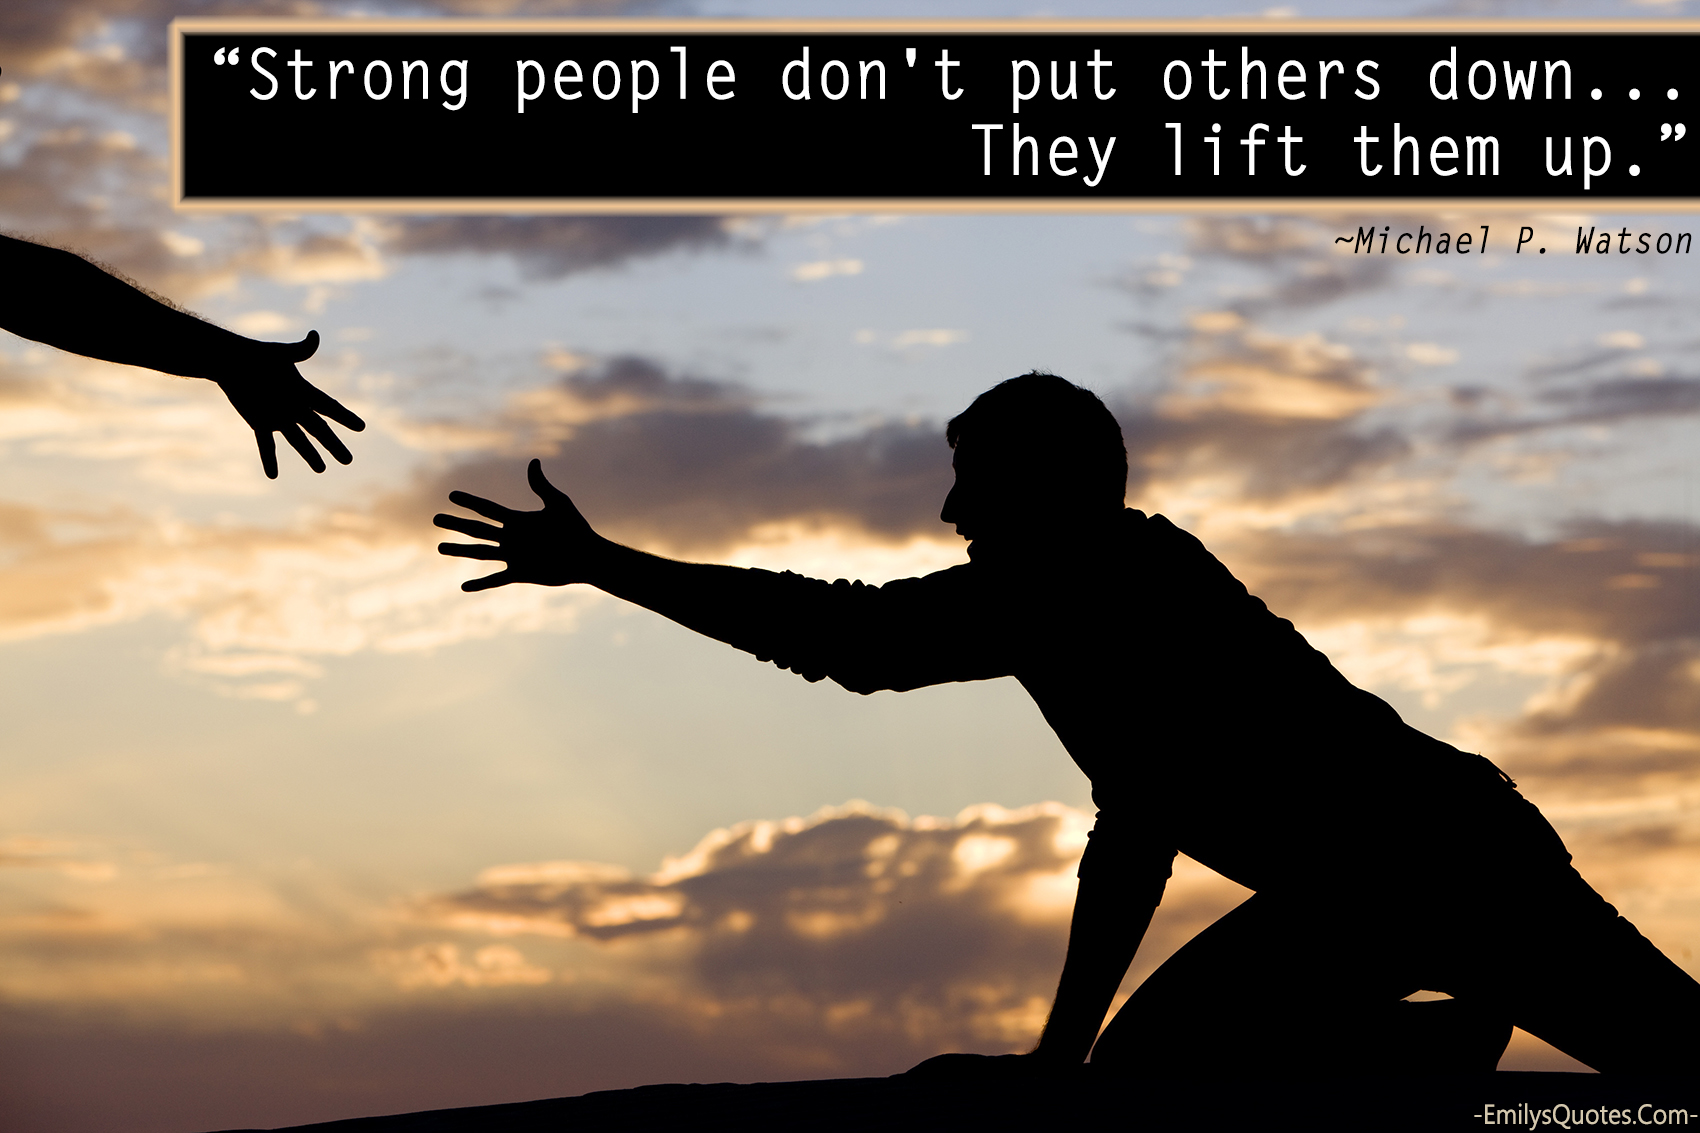 Strong people don’t put others down… They lift them up